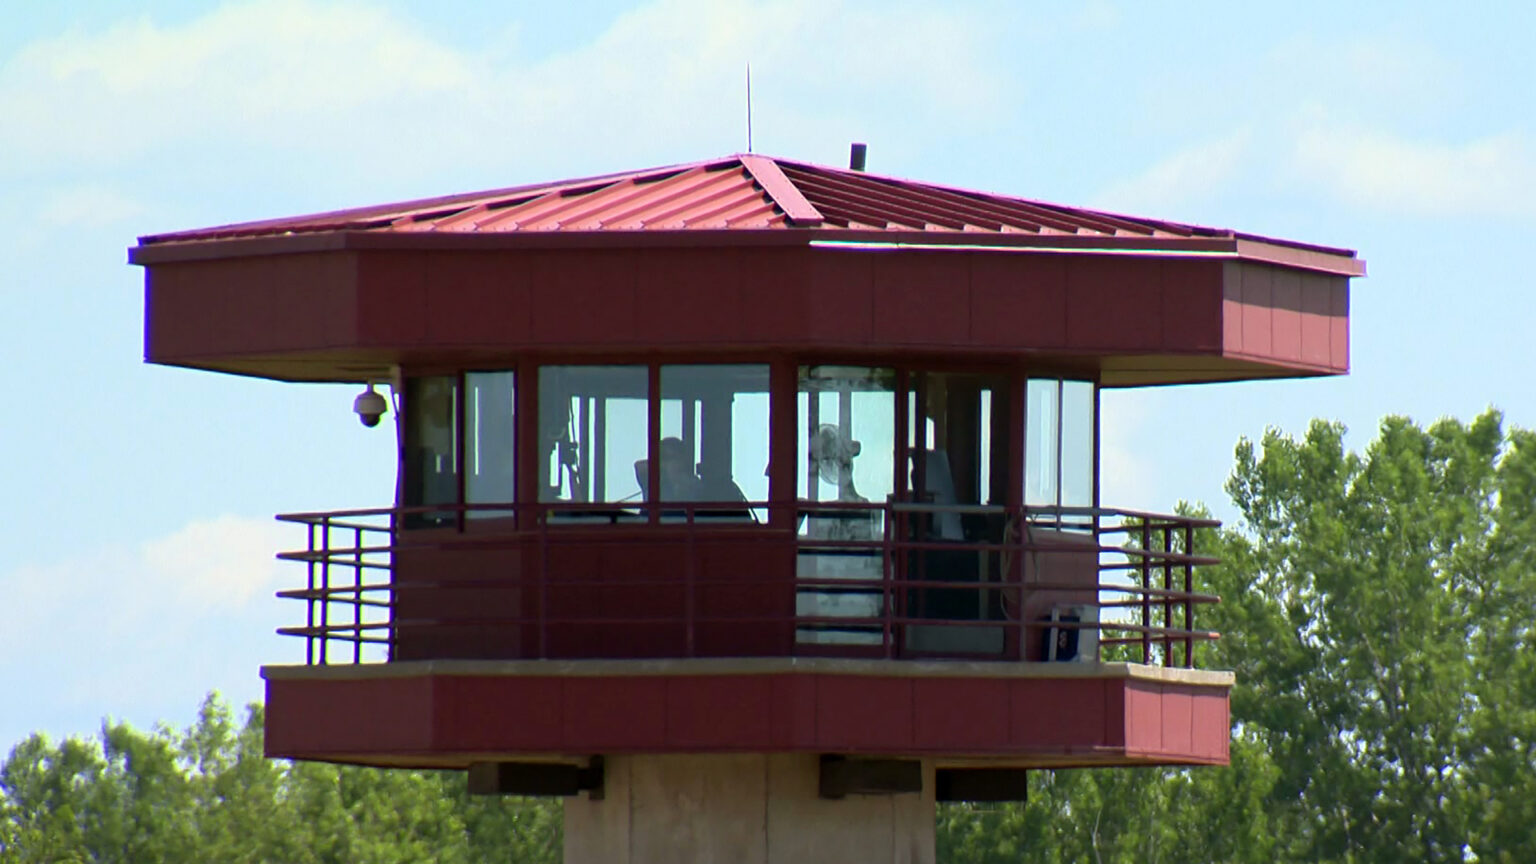 Corrections officers are visible through the windows of a prison guard tower with a security camera affixed to the underside of its low-slopped roof, with trees in the background.